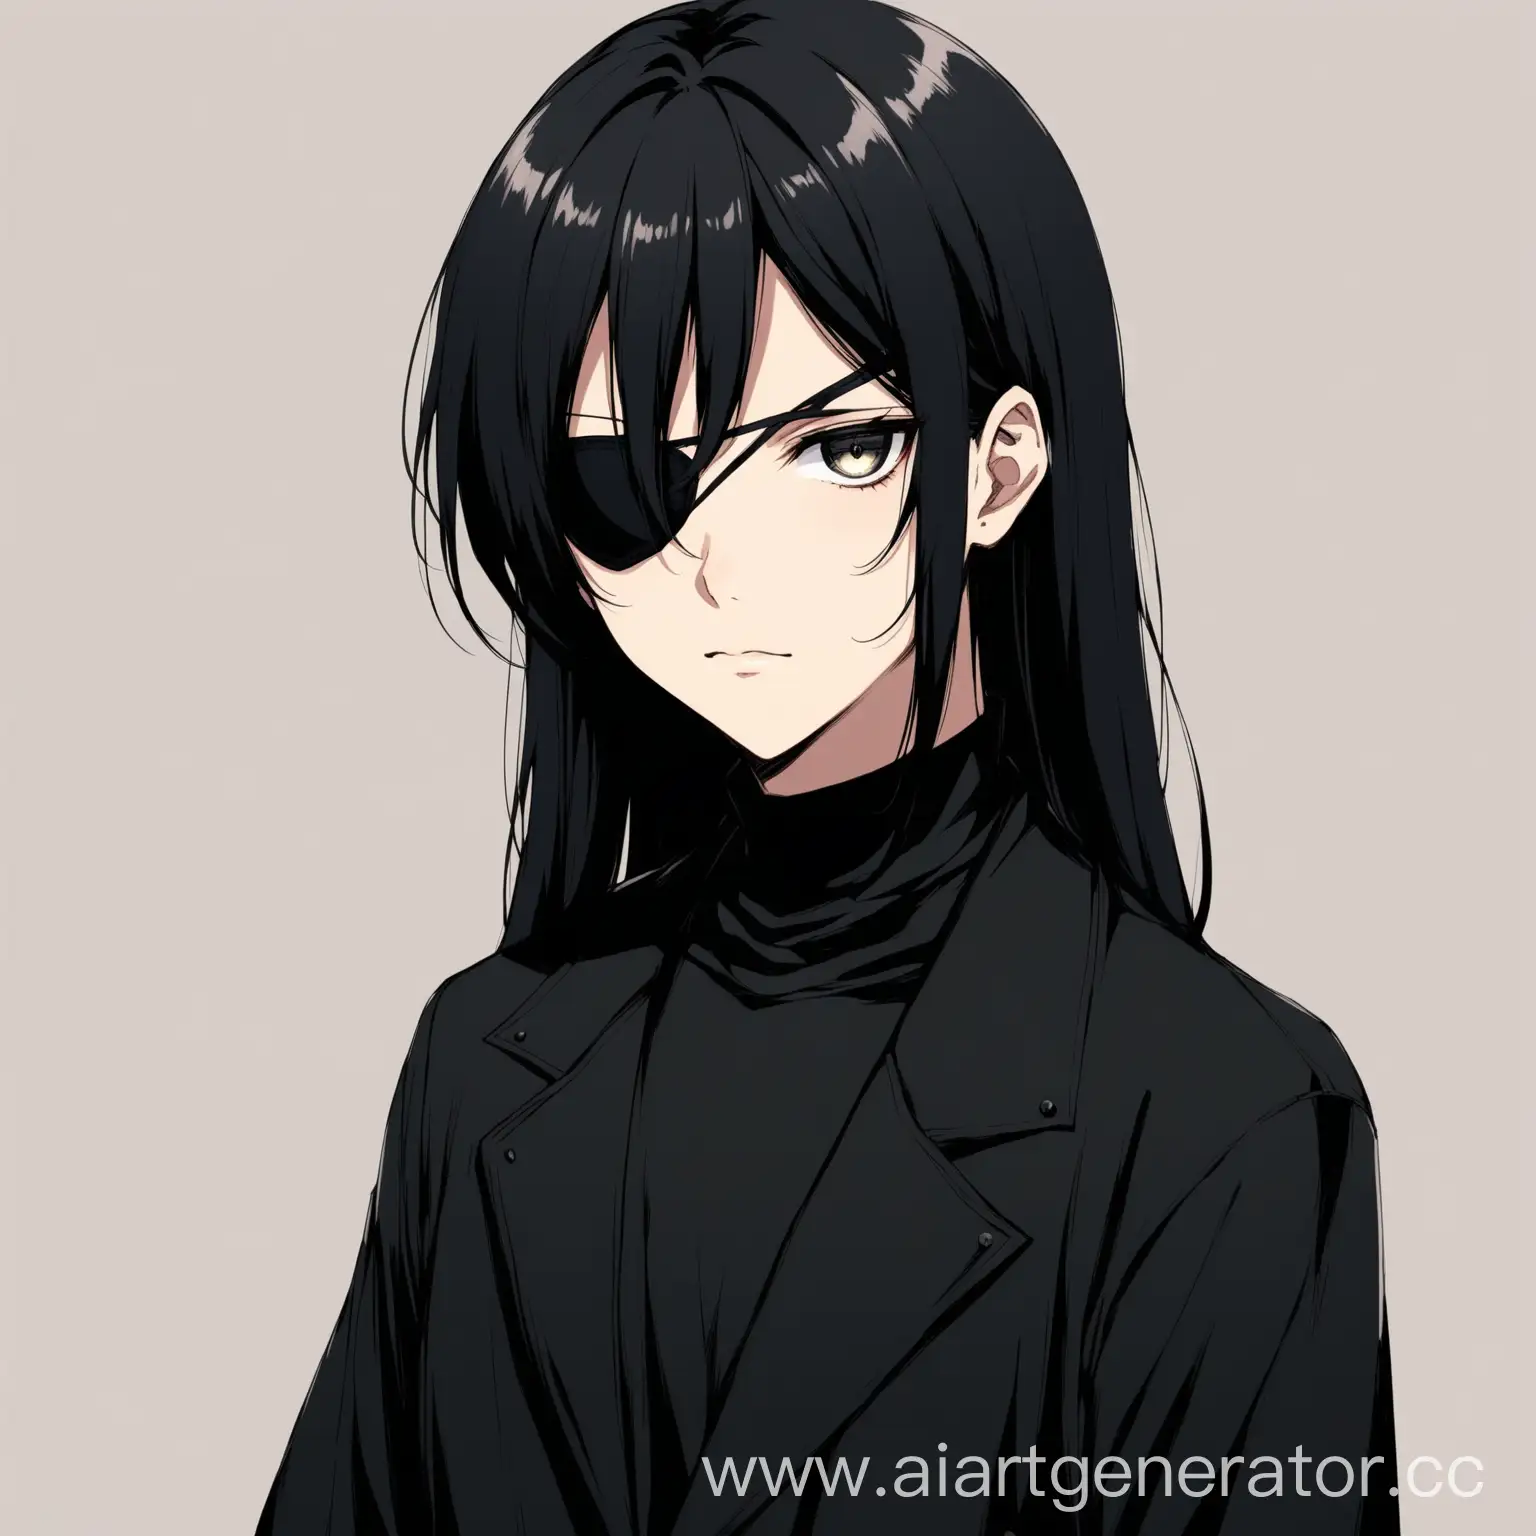 Anime guy who looks like a girl with straight black hair and black clothes with an eye patch looks forward